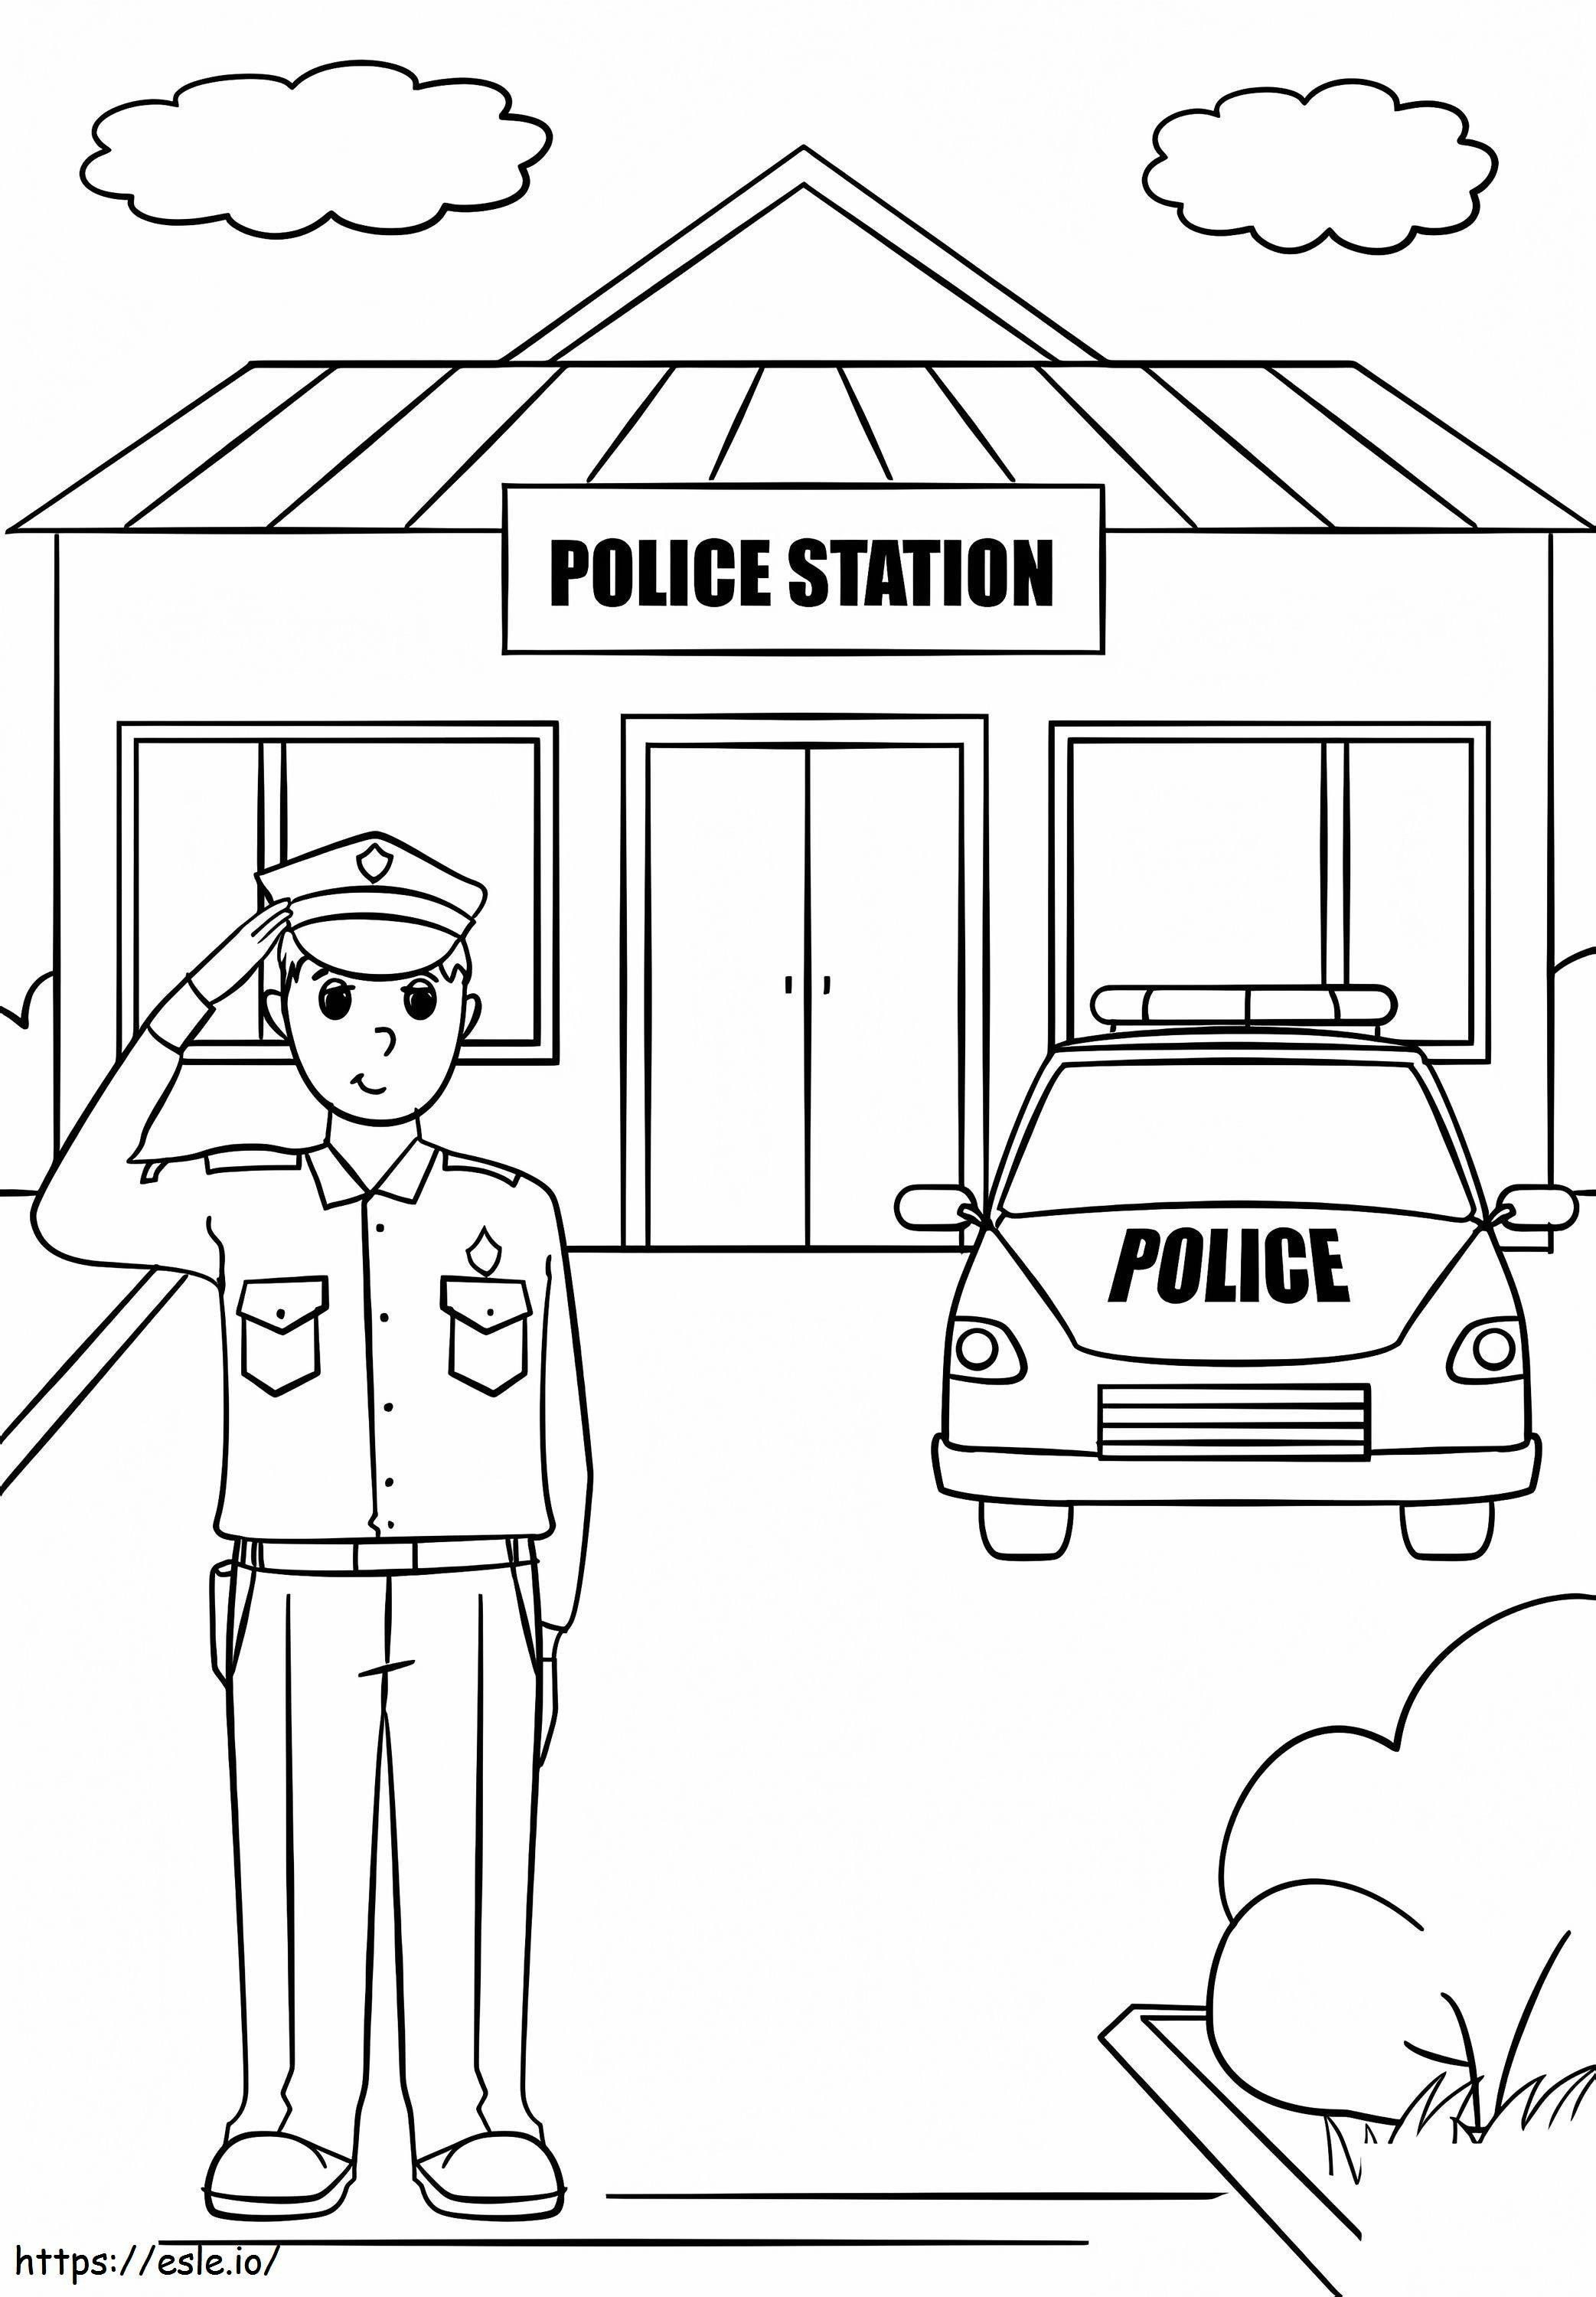 Police Station Coloring Page 90 